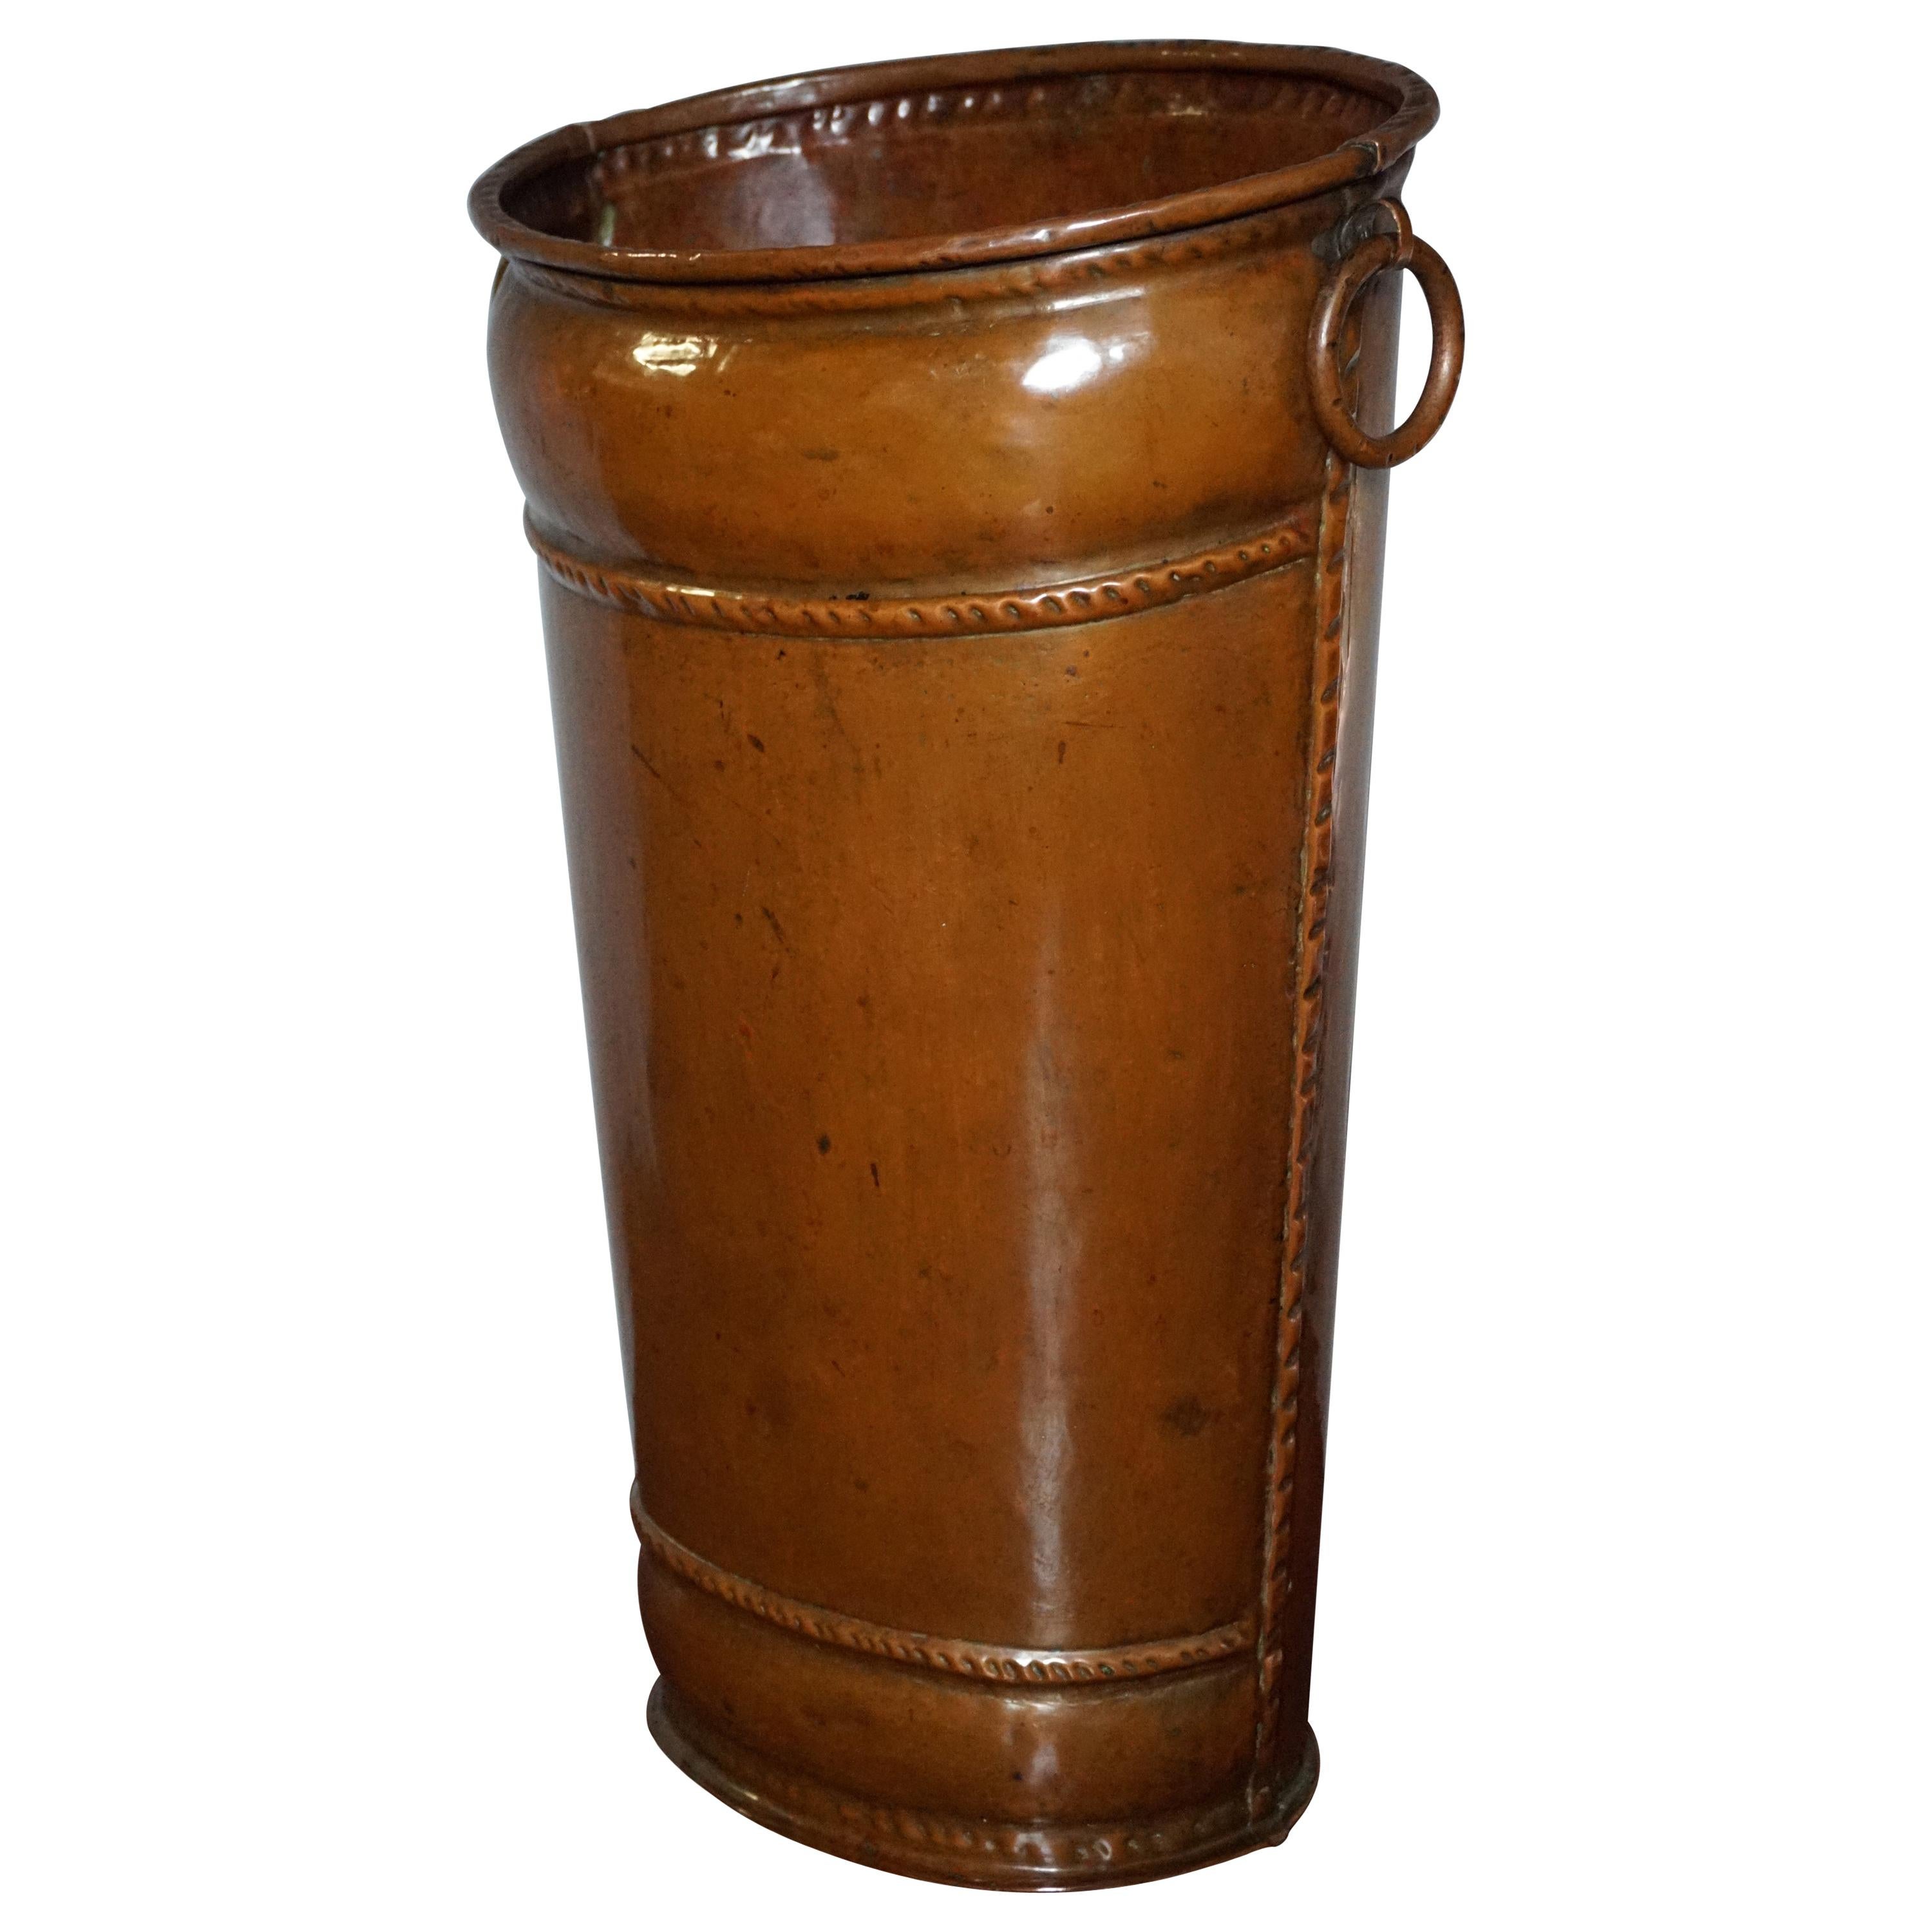 Late 1800s Handcrafted Copper Umbrella Stand Resembling Ancient Leather Bucket For Sale